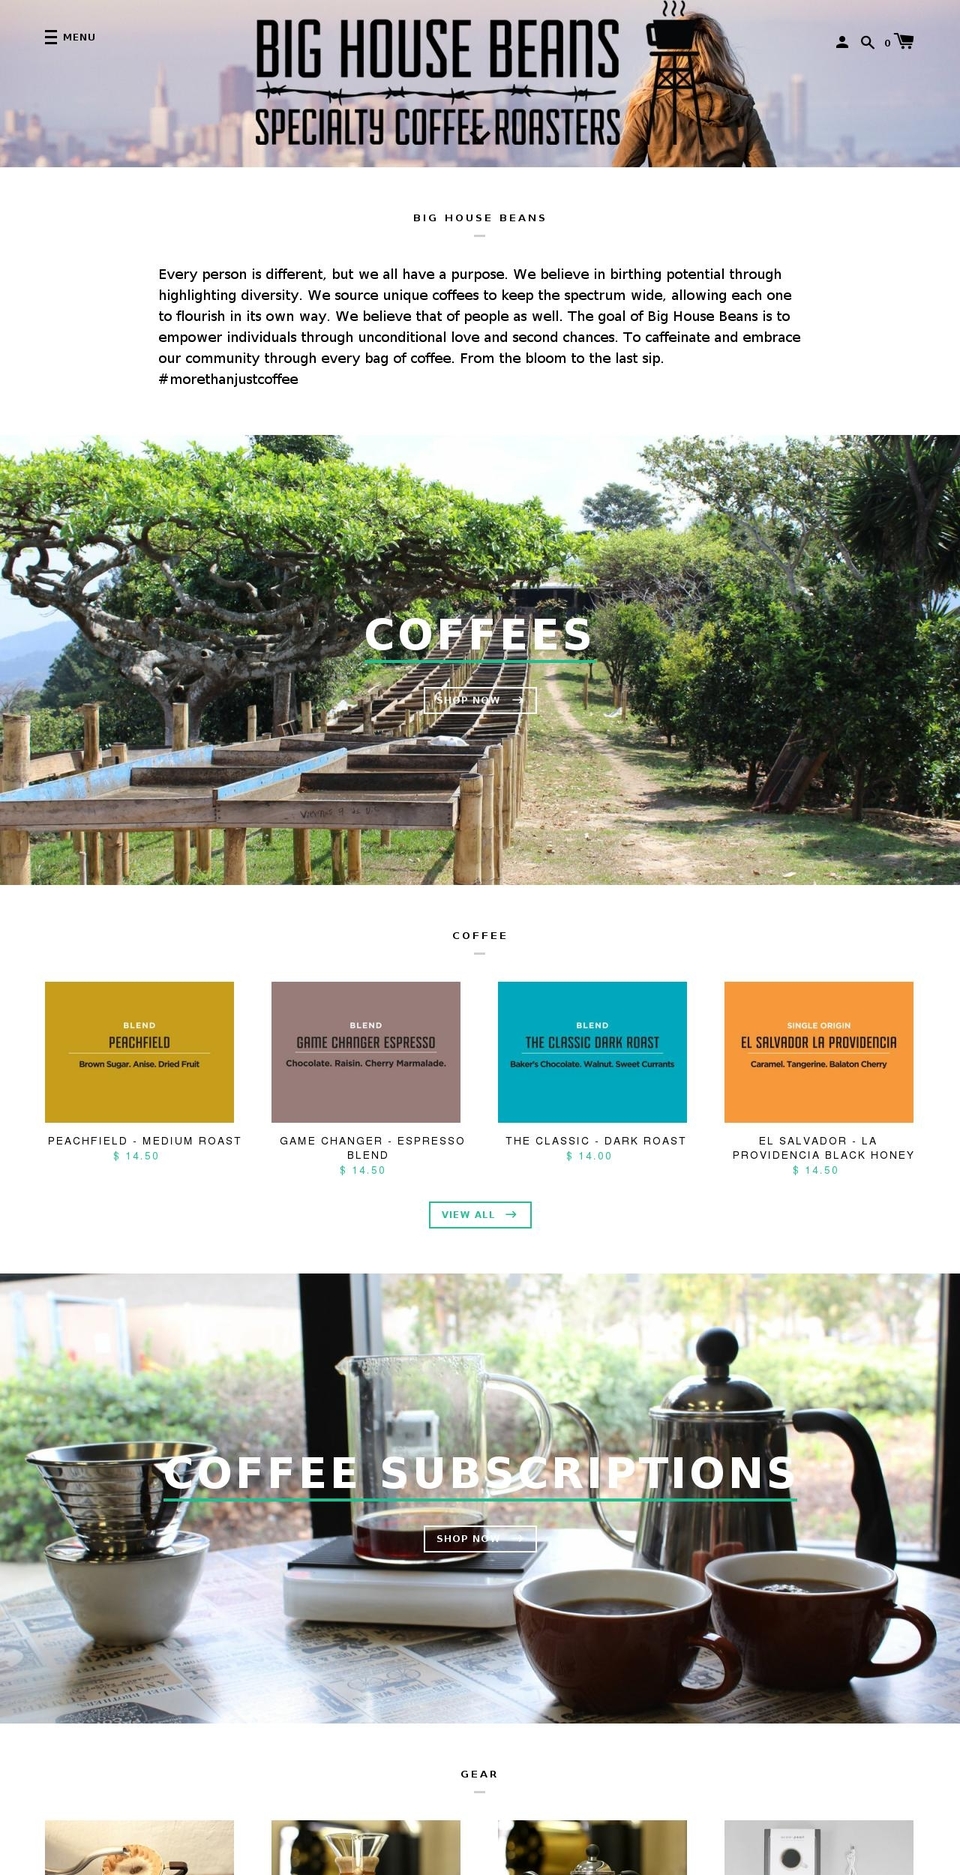 Label Shopify theme site example bighousebeans.com